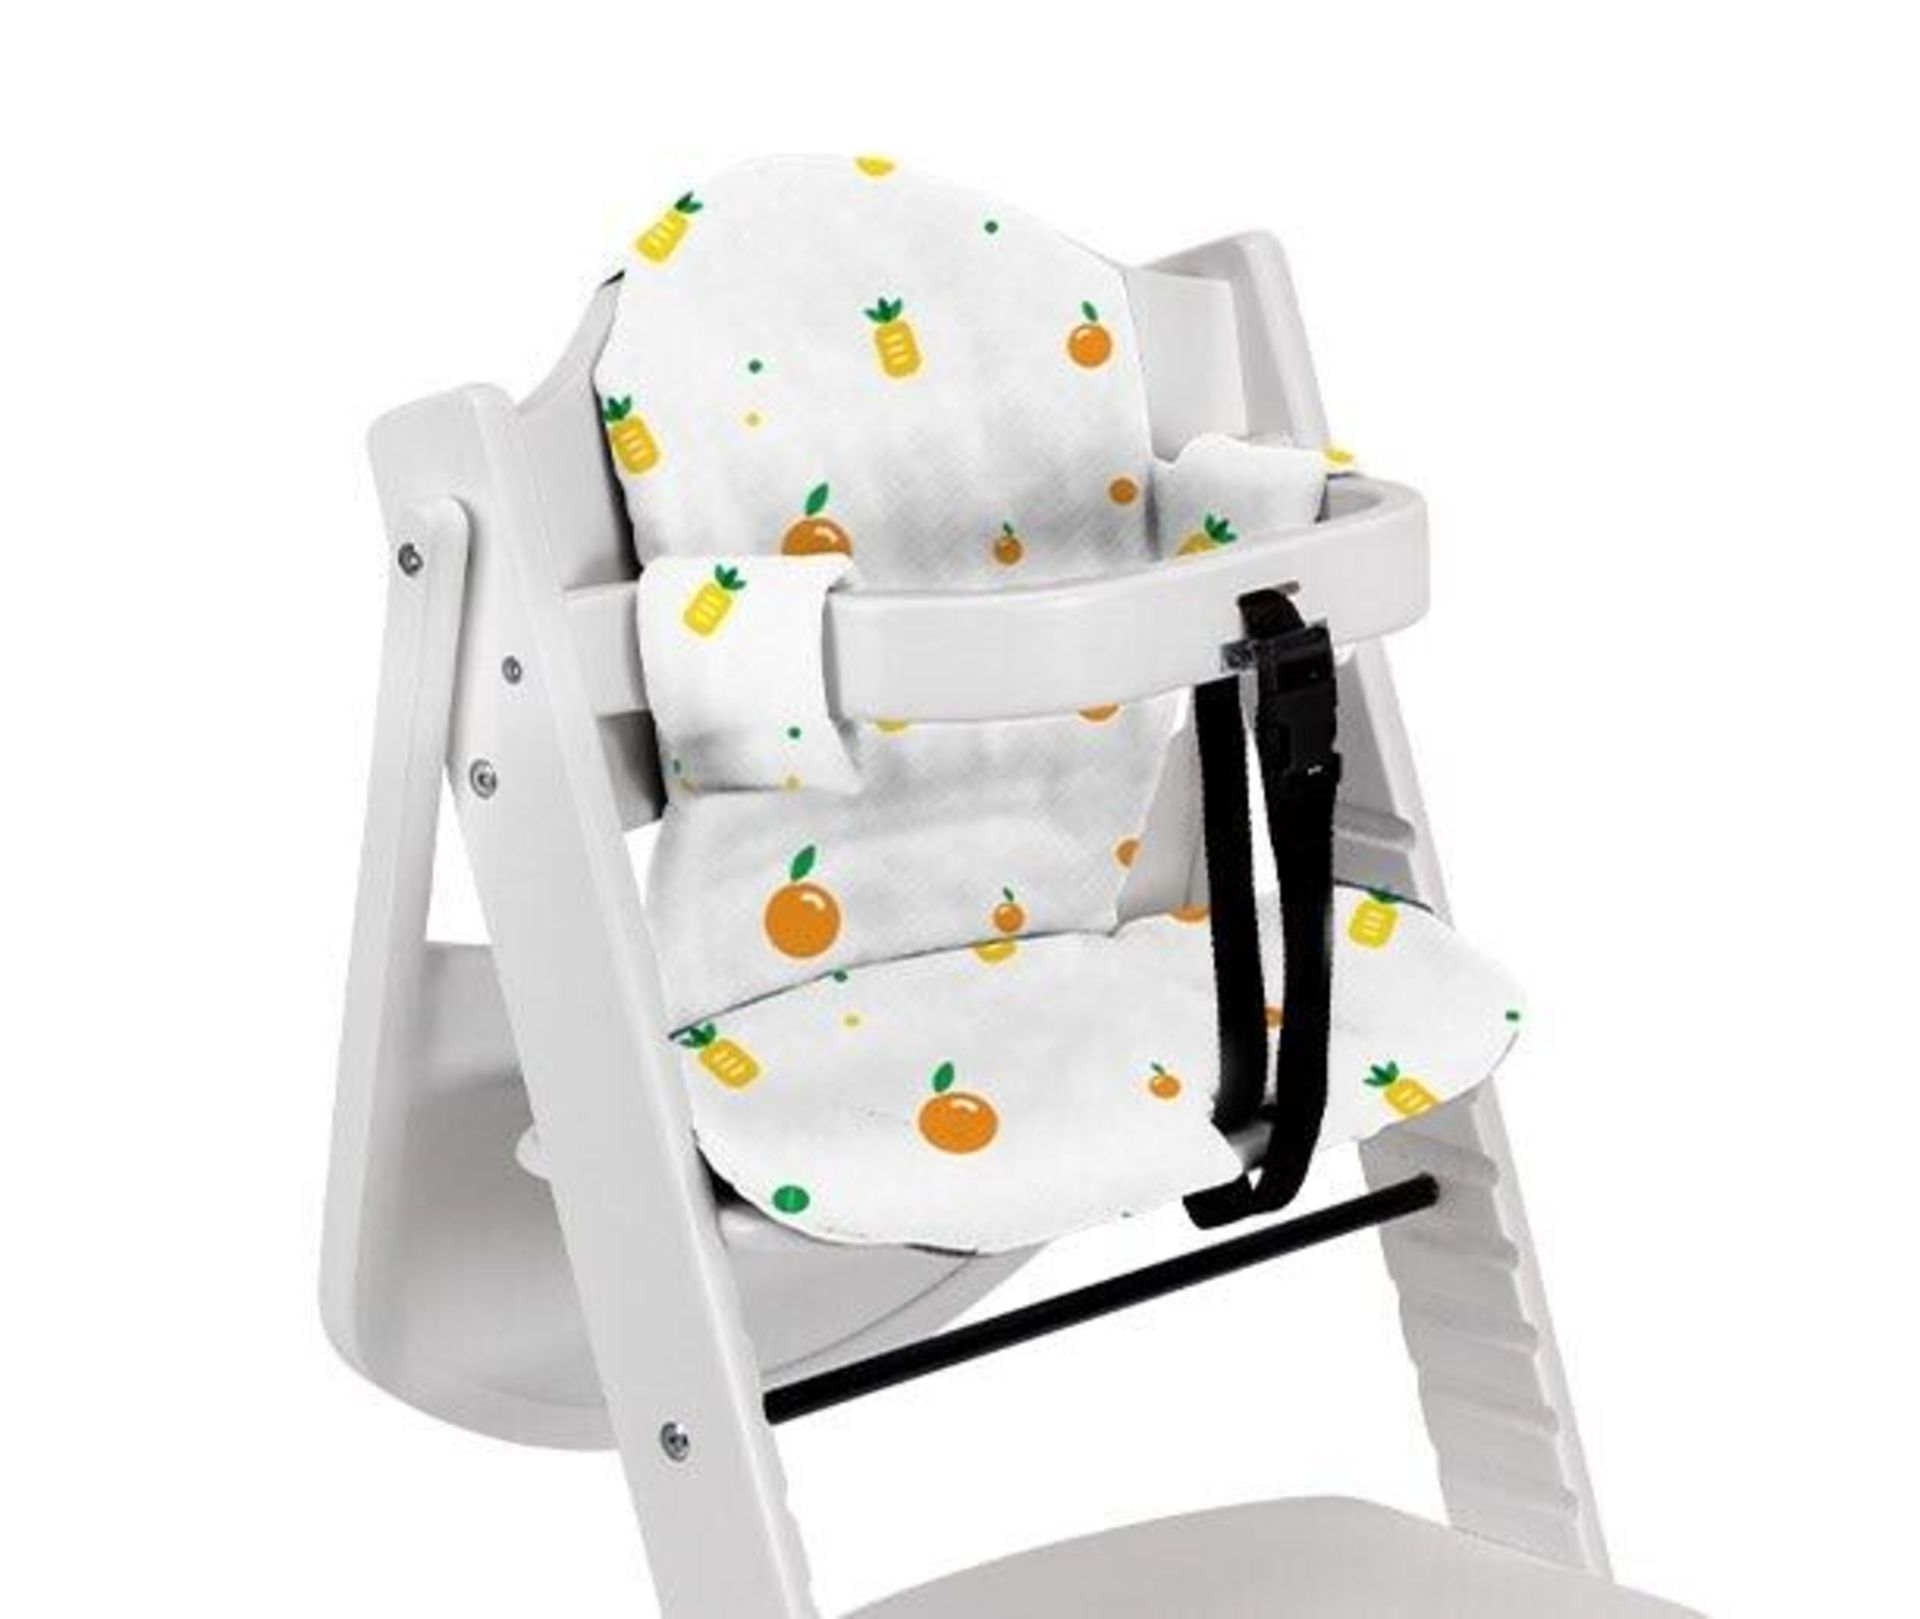 Mokee Yummee 5-Point Harness High Chair, White - Image 3 of 4